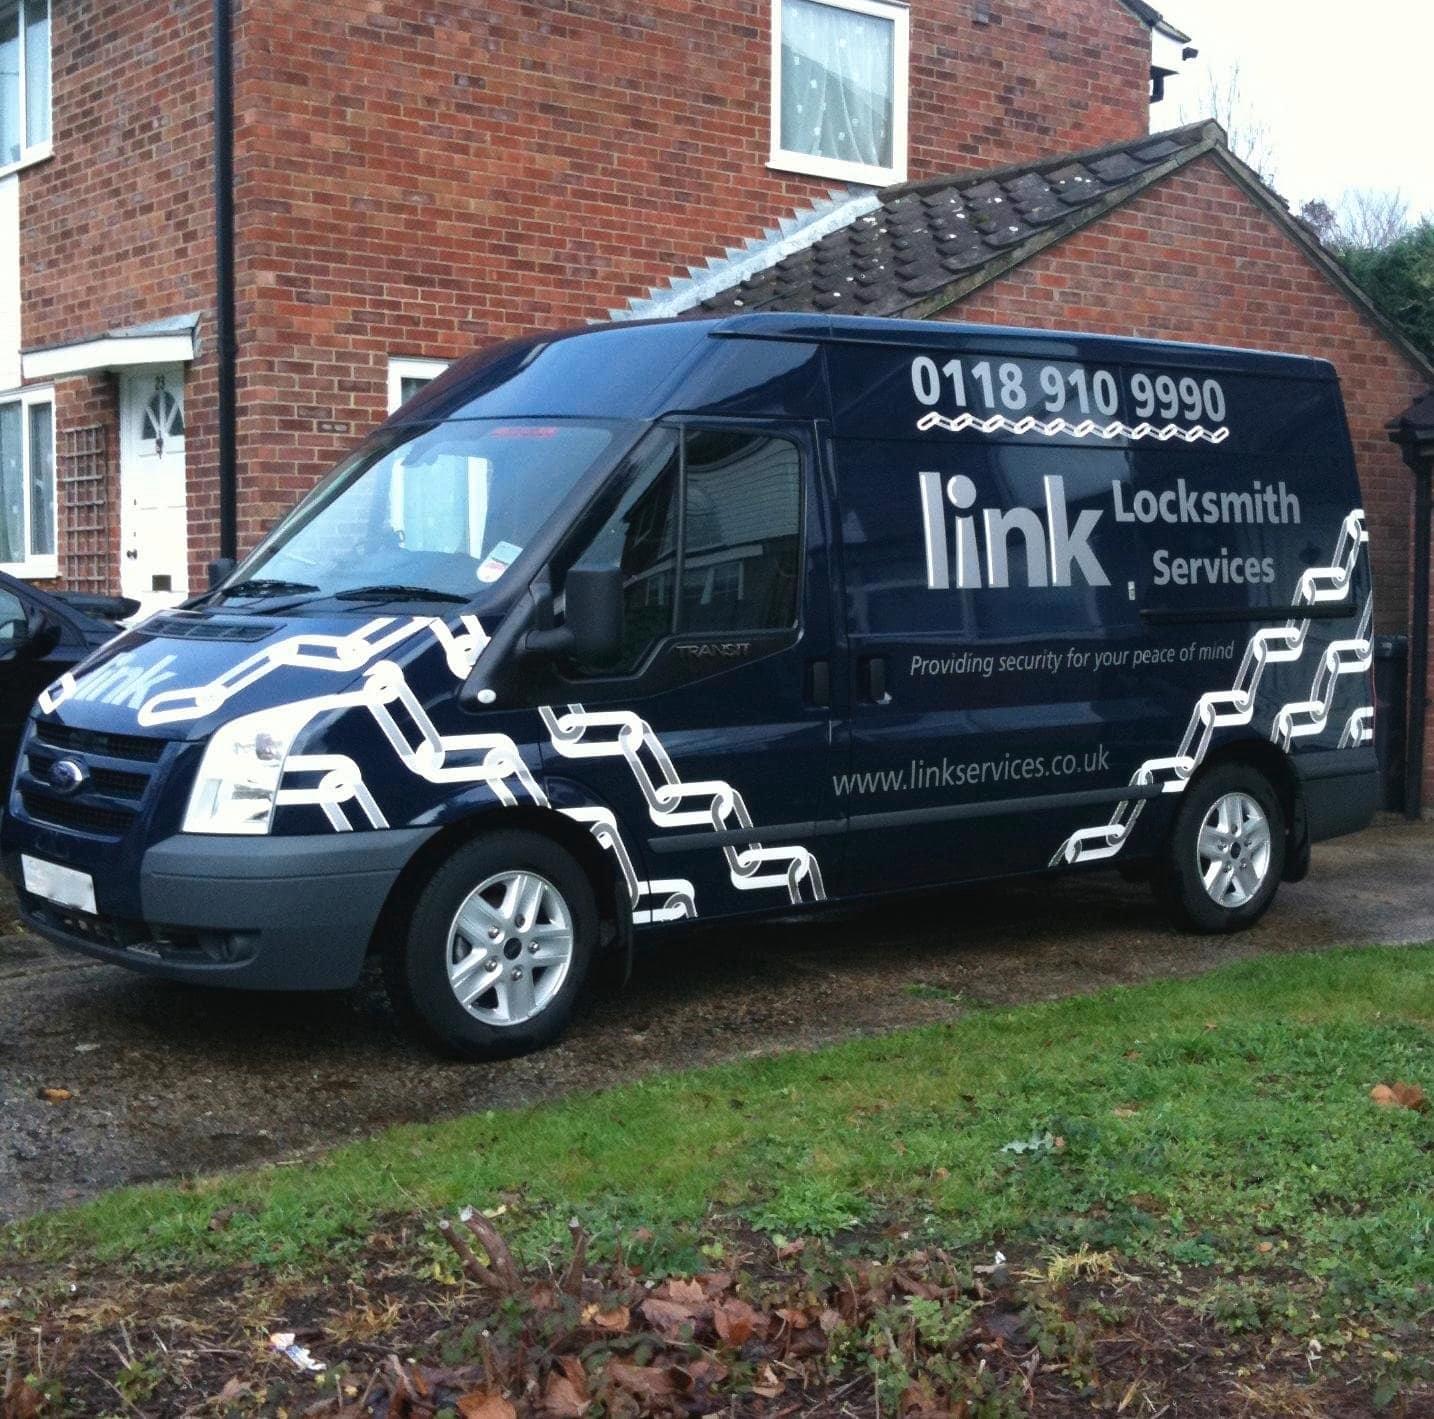 Images Link Locksmith Services